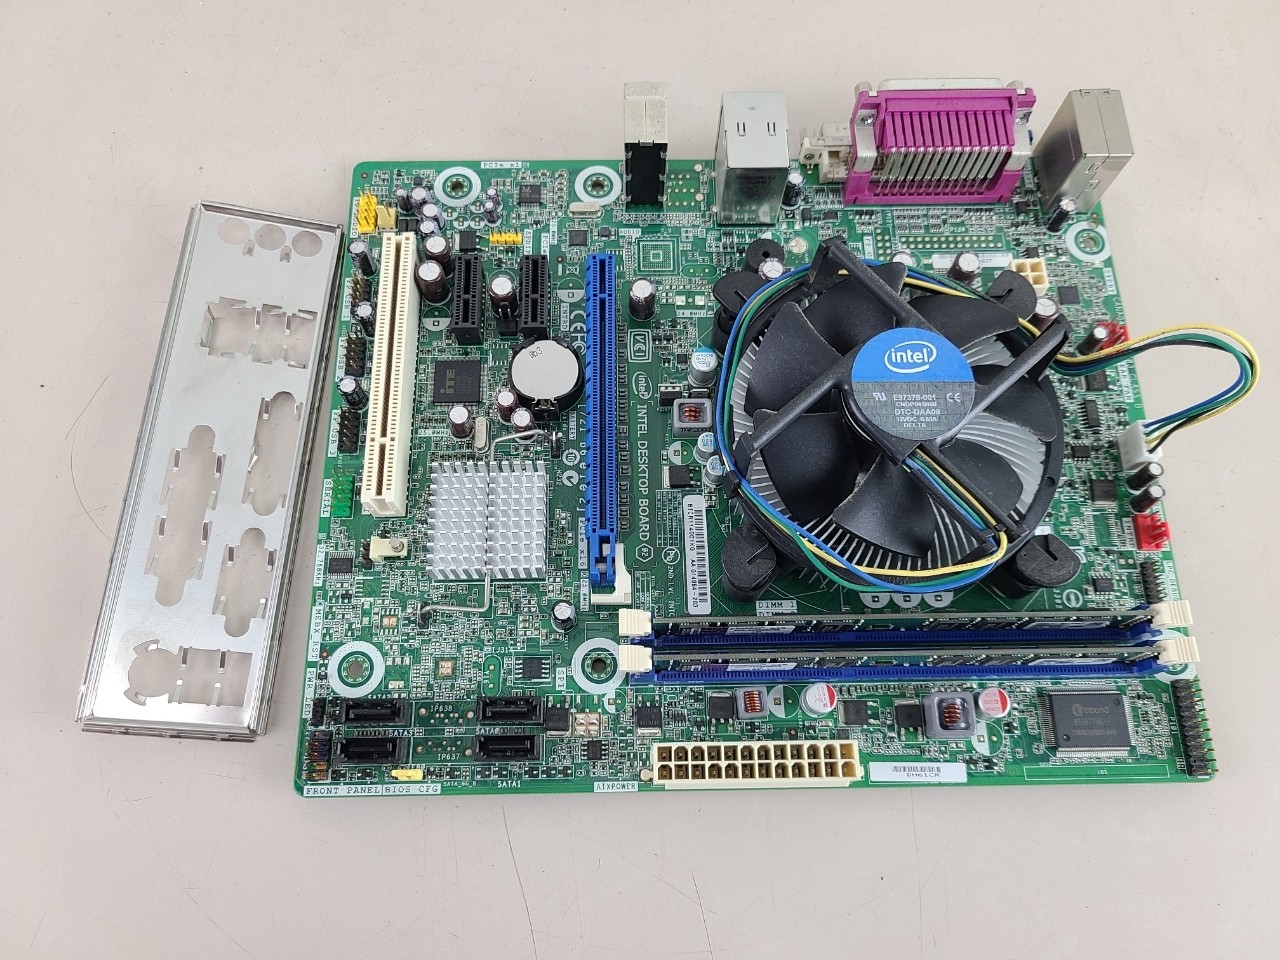 Intel DH61CR Motherboard i5-2400 4 GB RAM I/O Shield and CPU COOLER COMBO